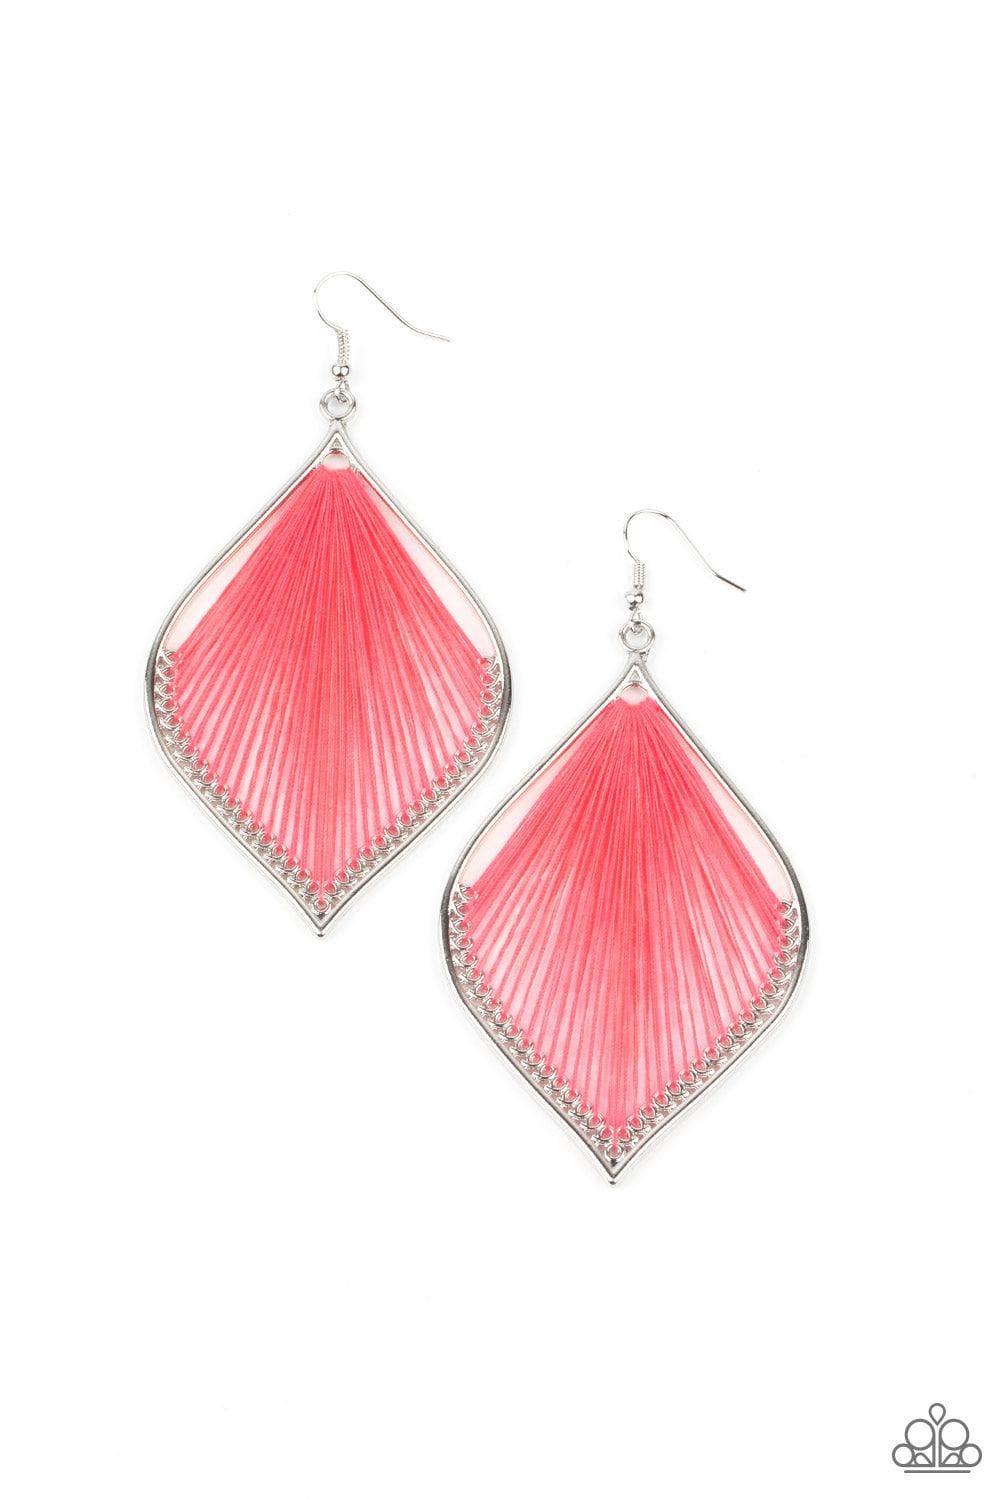 Paparazzi Accessories - String Theory - Pink Earrings - Bling by JessieK